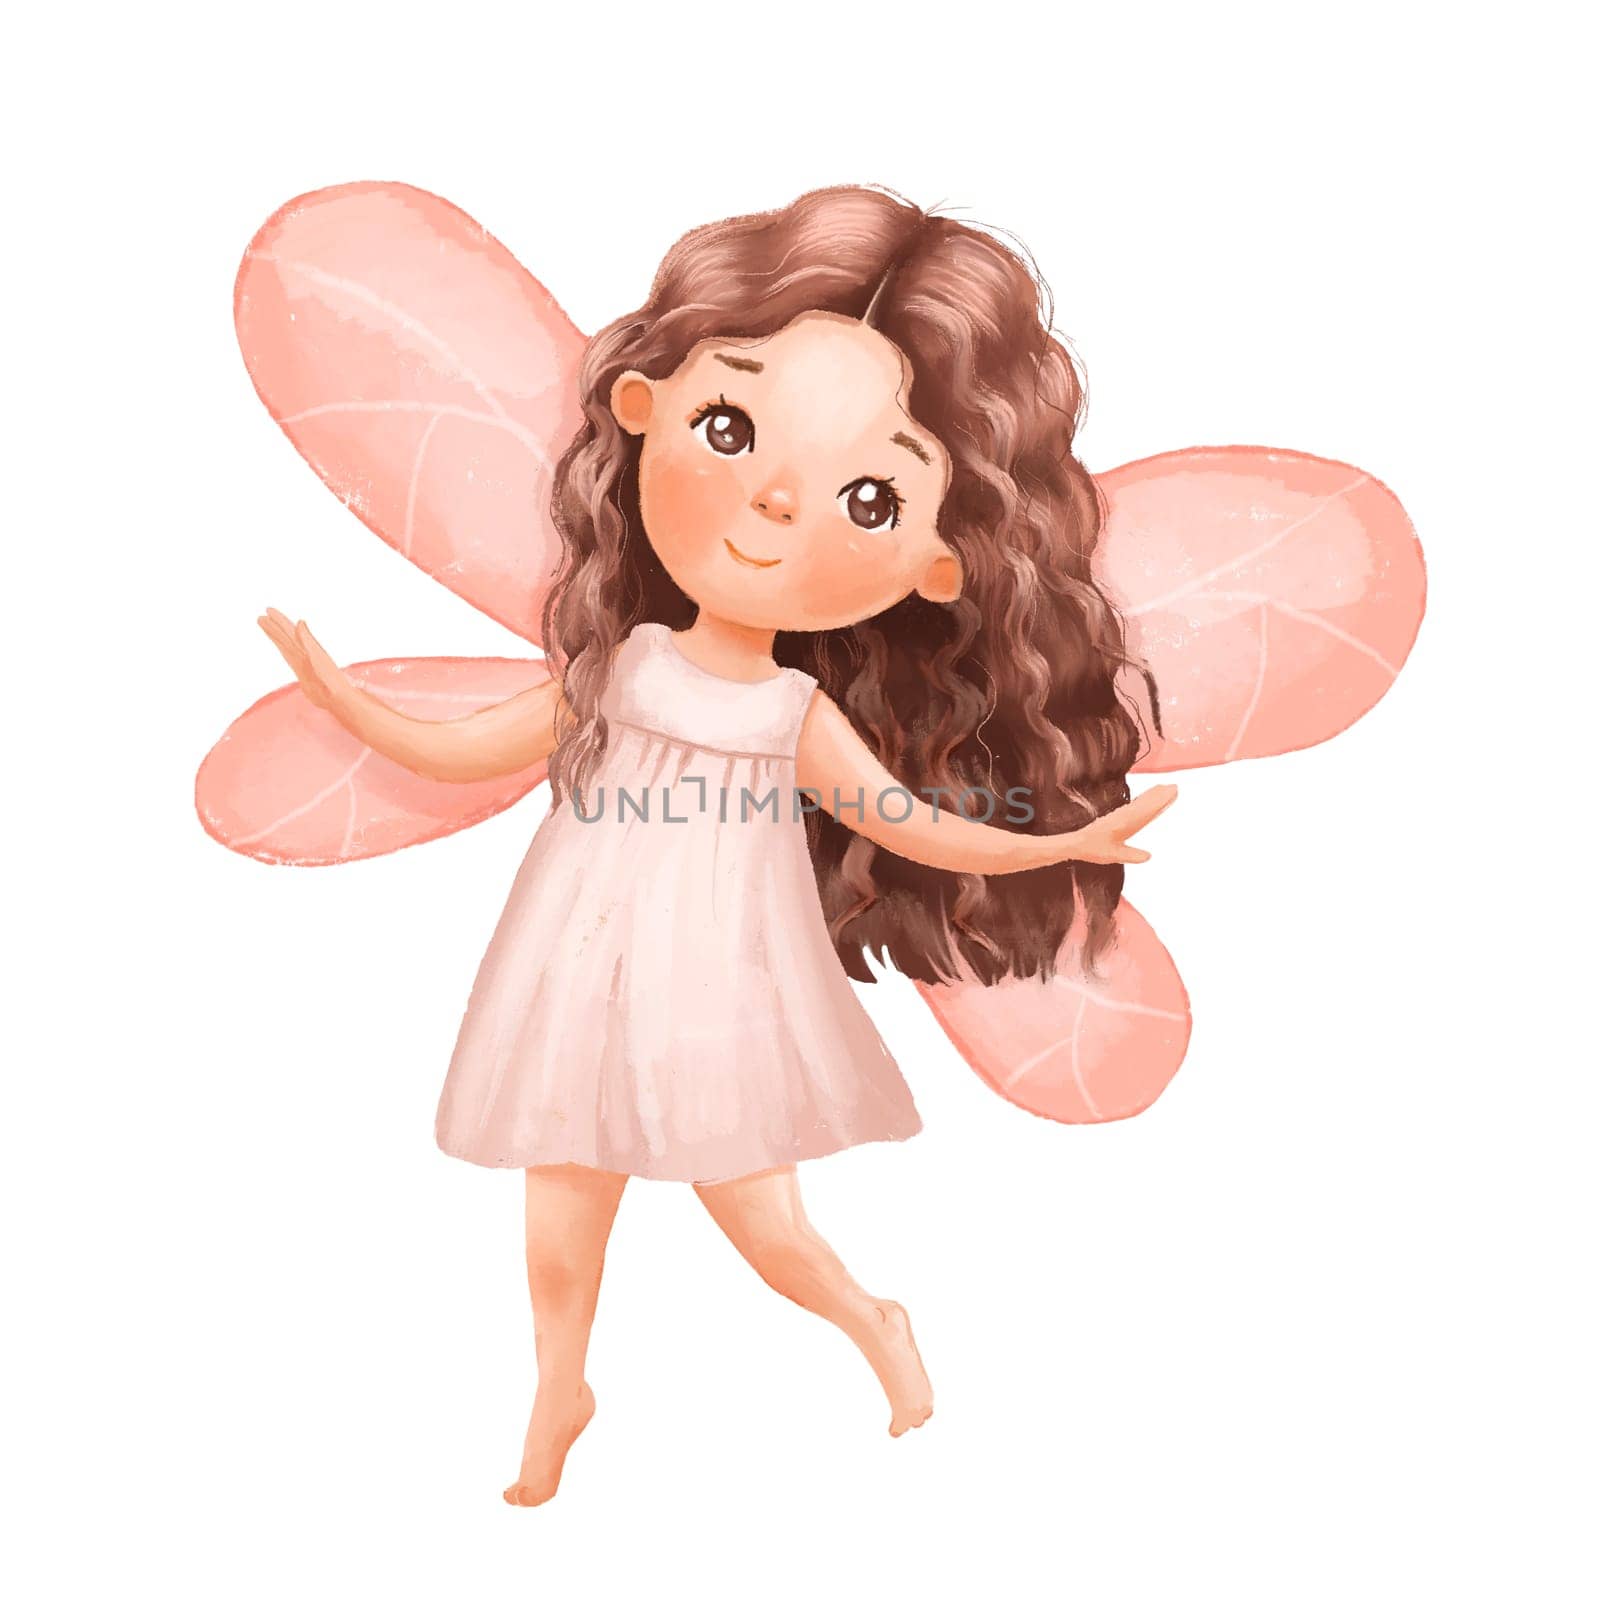 Cute cartoon fairy in pink dress dancing. Watercolor hand drawn illustration isolated on white background